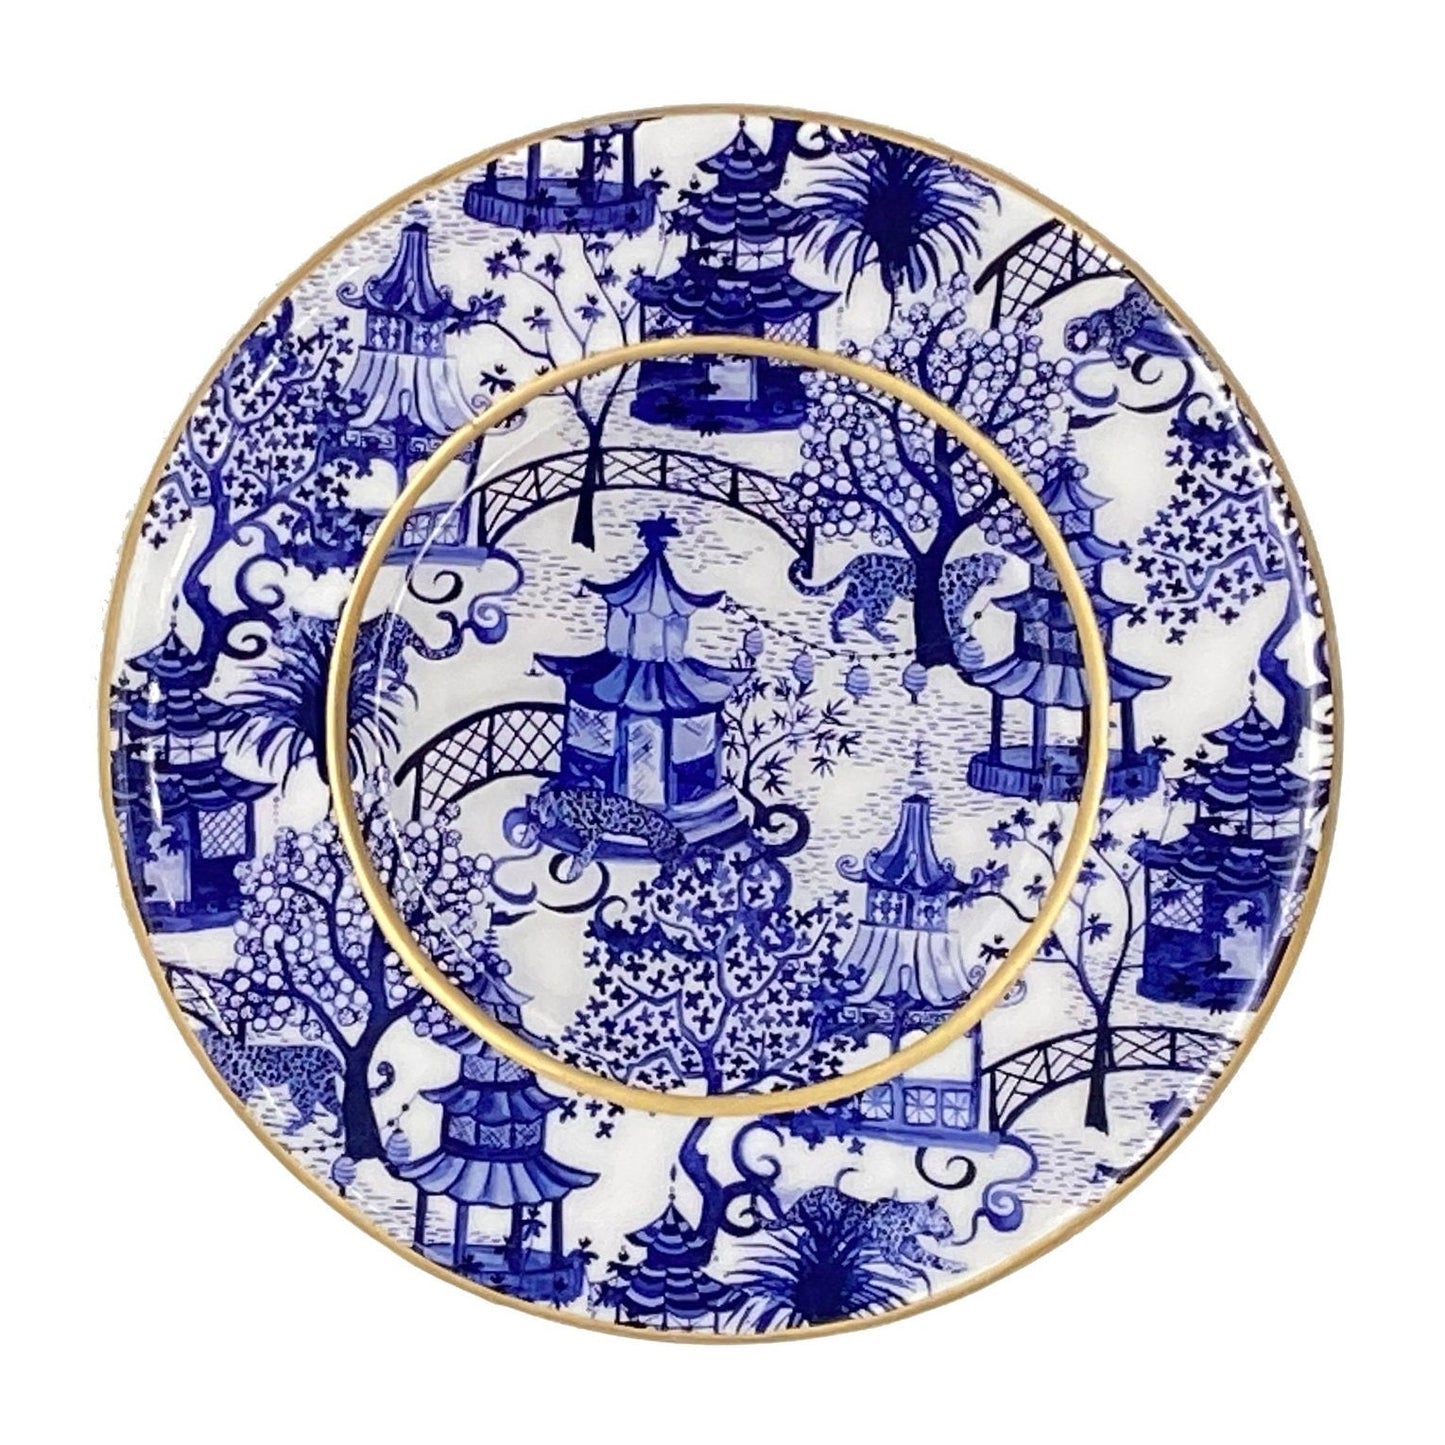 Garden Party Blue and White Dessert Plates- Set of four